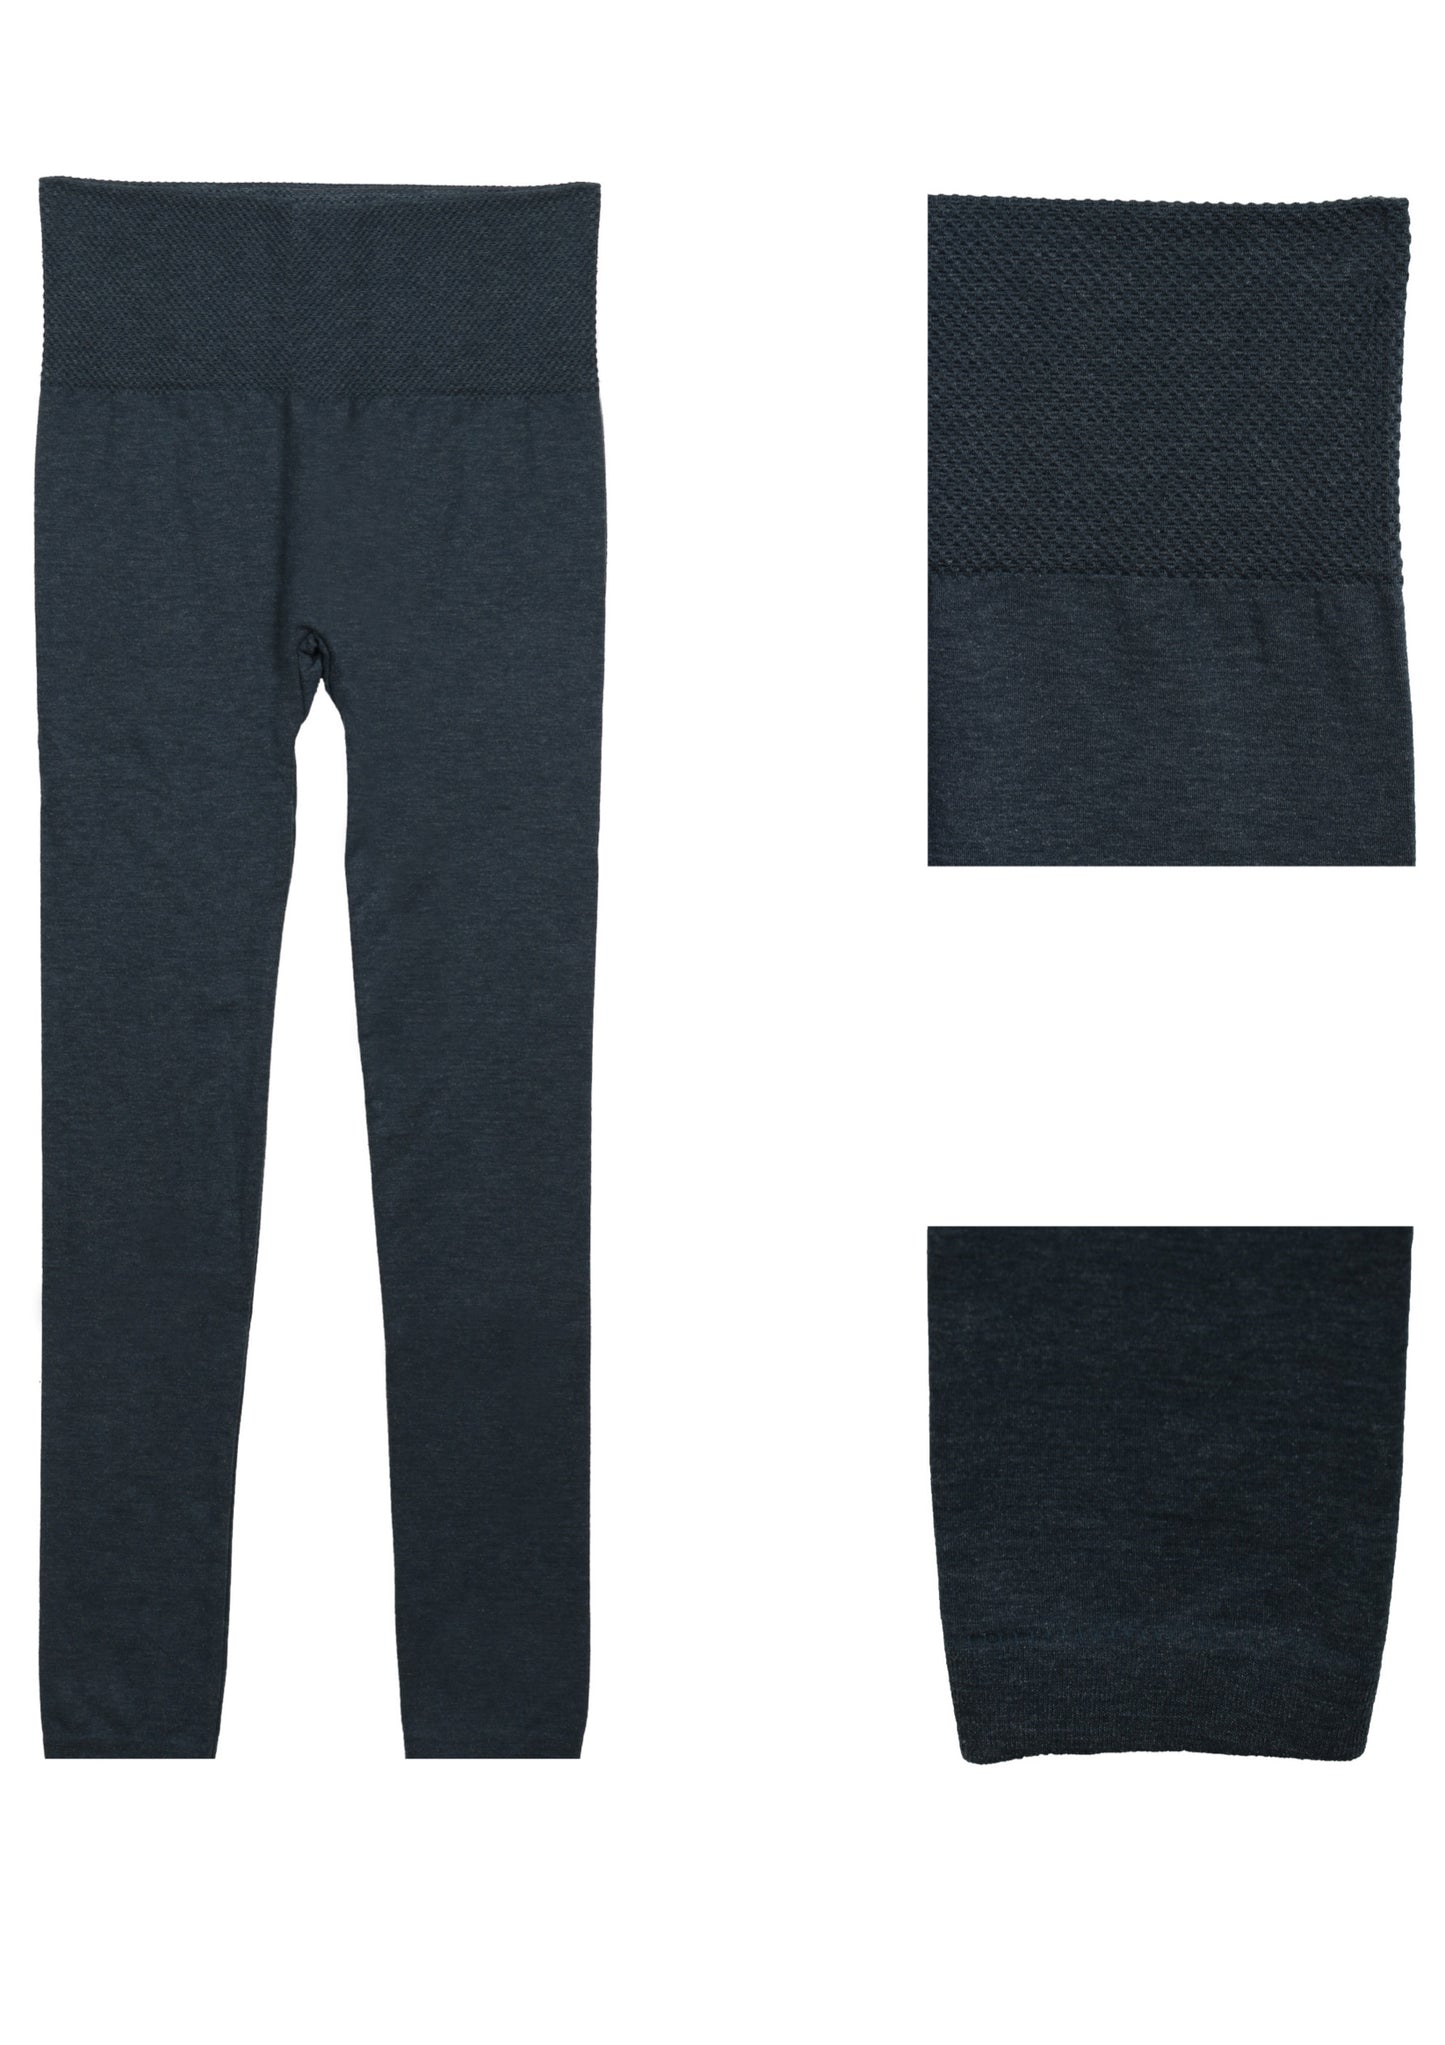 Heather Basic High Waist Fleece Lined Legging ( More Colors) / Avail in Plus